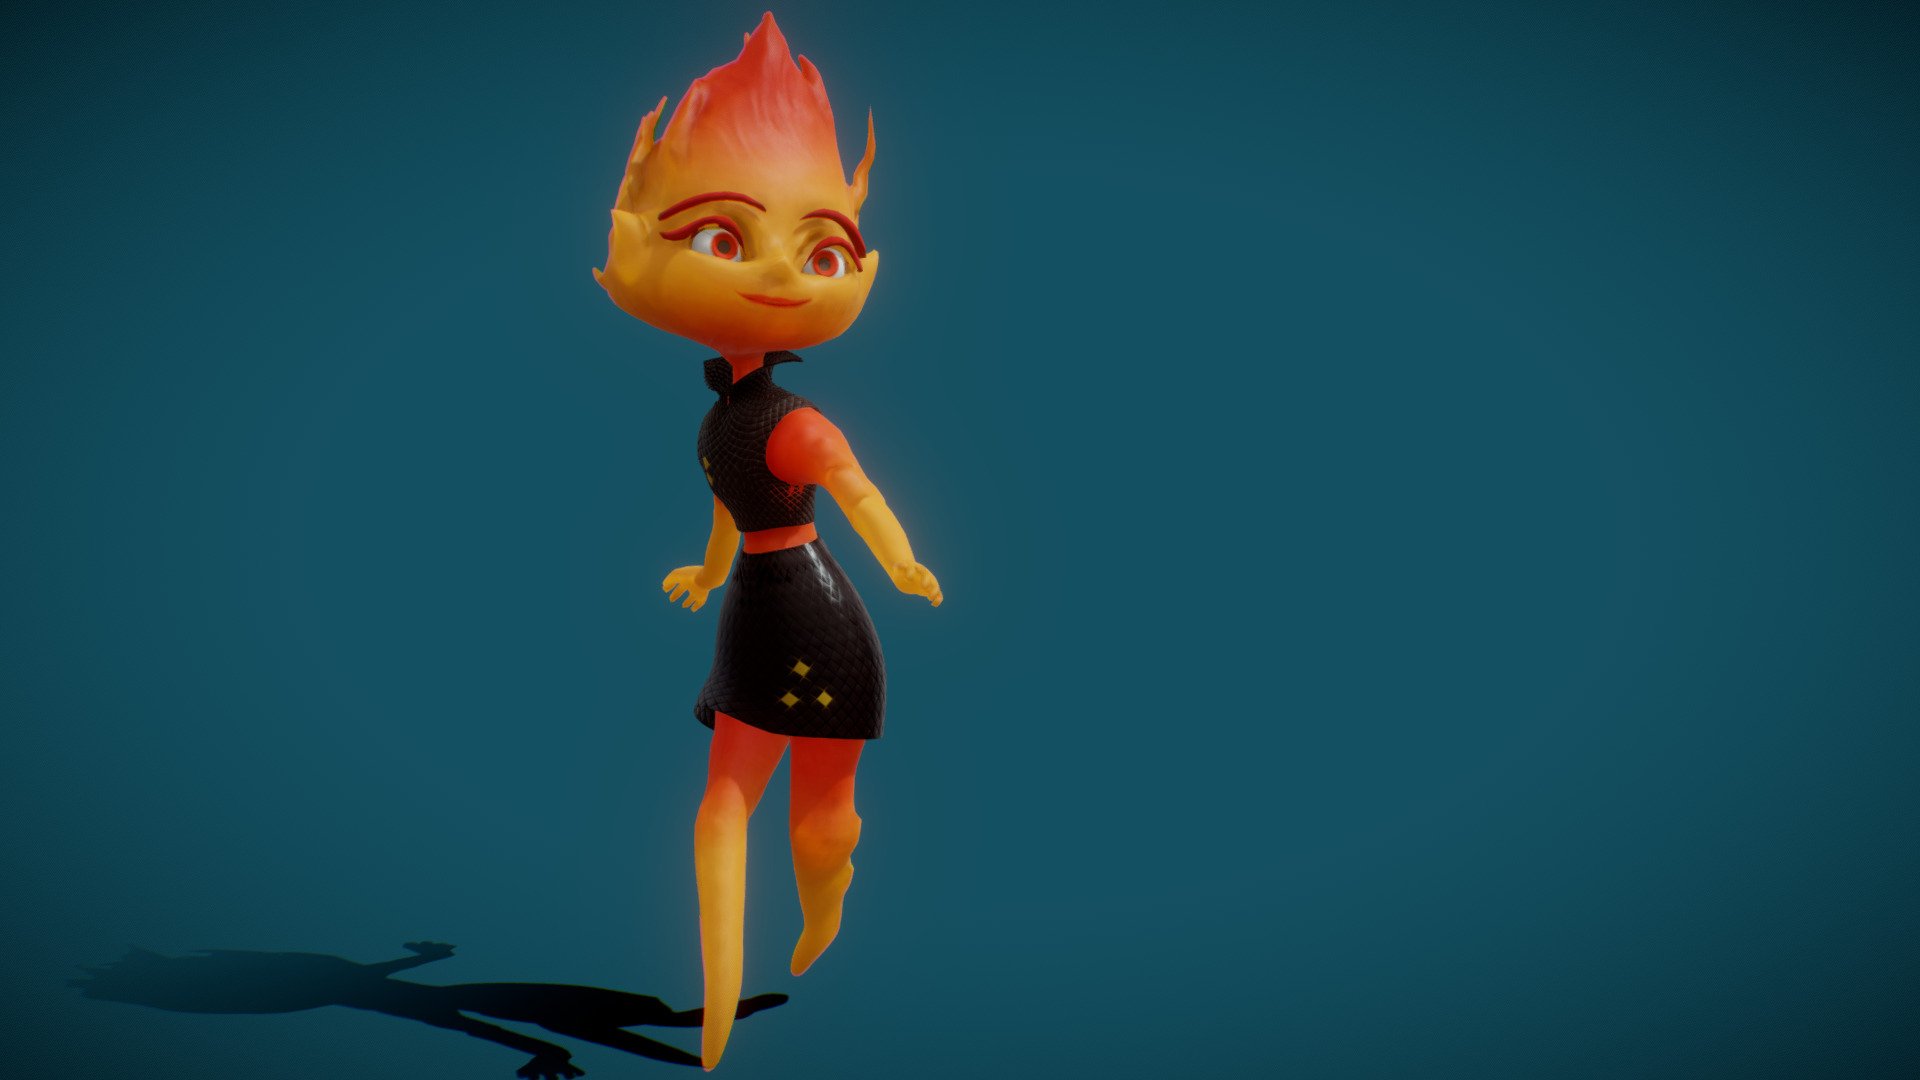 Ember Lumen fan art from Elemental

Textured
Mapped
Rigged
Animated 

PBR: 
Model rigged and textured ready for animating

Rig for: 3Dsmax, Unreal, Blender, Maya and Iclone

Zip file contains obj, iavatar and fbx format with textures.
Test animation included

Ember Lumen, a tough, quick-witted fire element who loves working at her family's convenience store in Fire Town, but has trouble controlling her explosive temper.

If you have any questions please don’t hesitate to contact me. 
I will respond you ASAP.
I encourage you to check my other 3D models 3d model